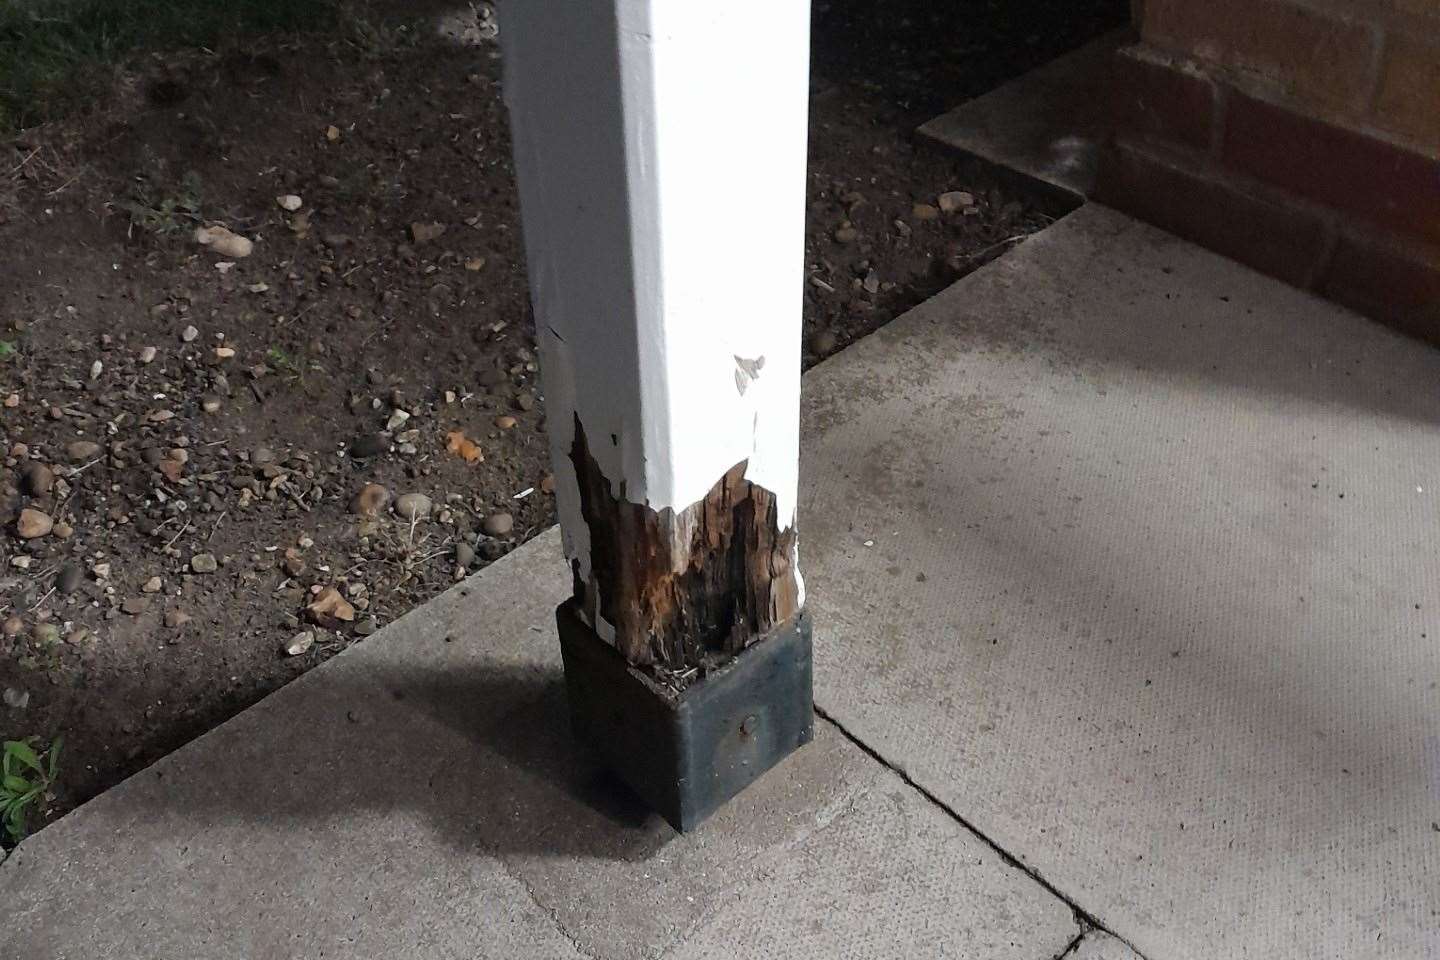 The post at the entrance has been left to rot